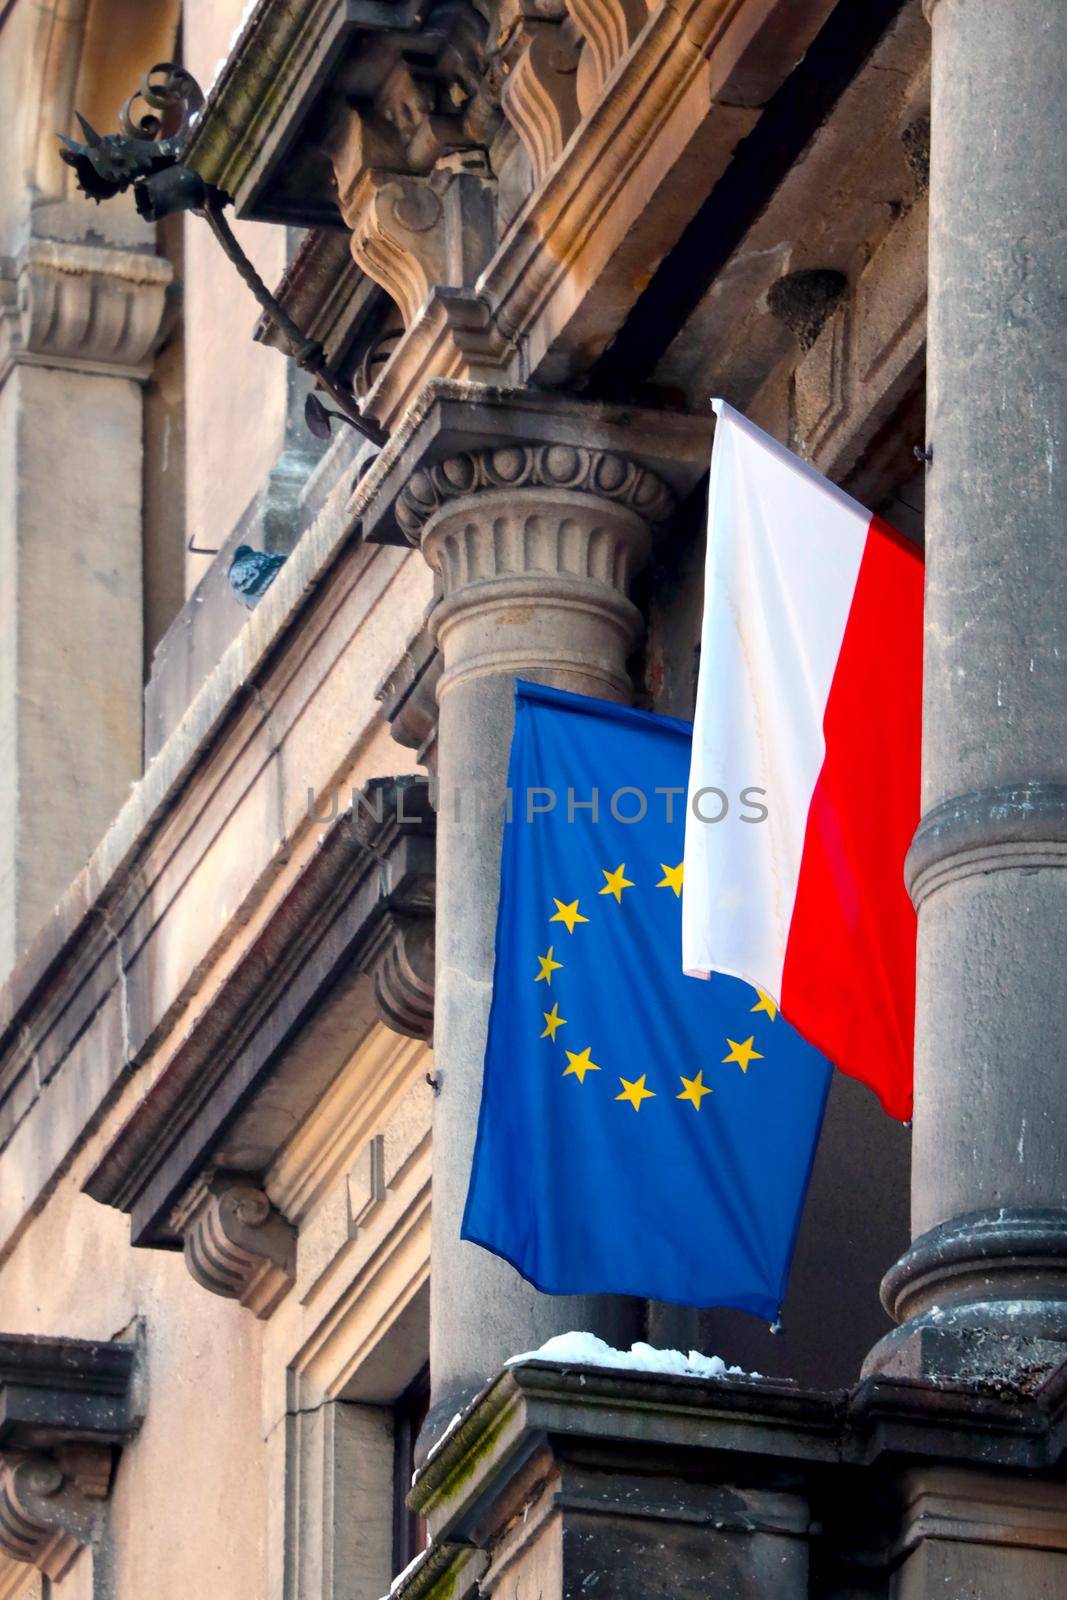 The flags of Poland and the European Union are hung on the building